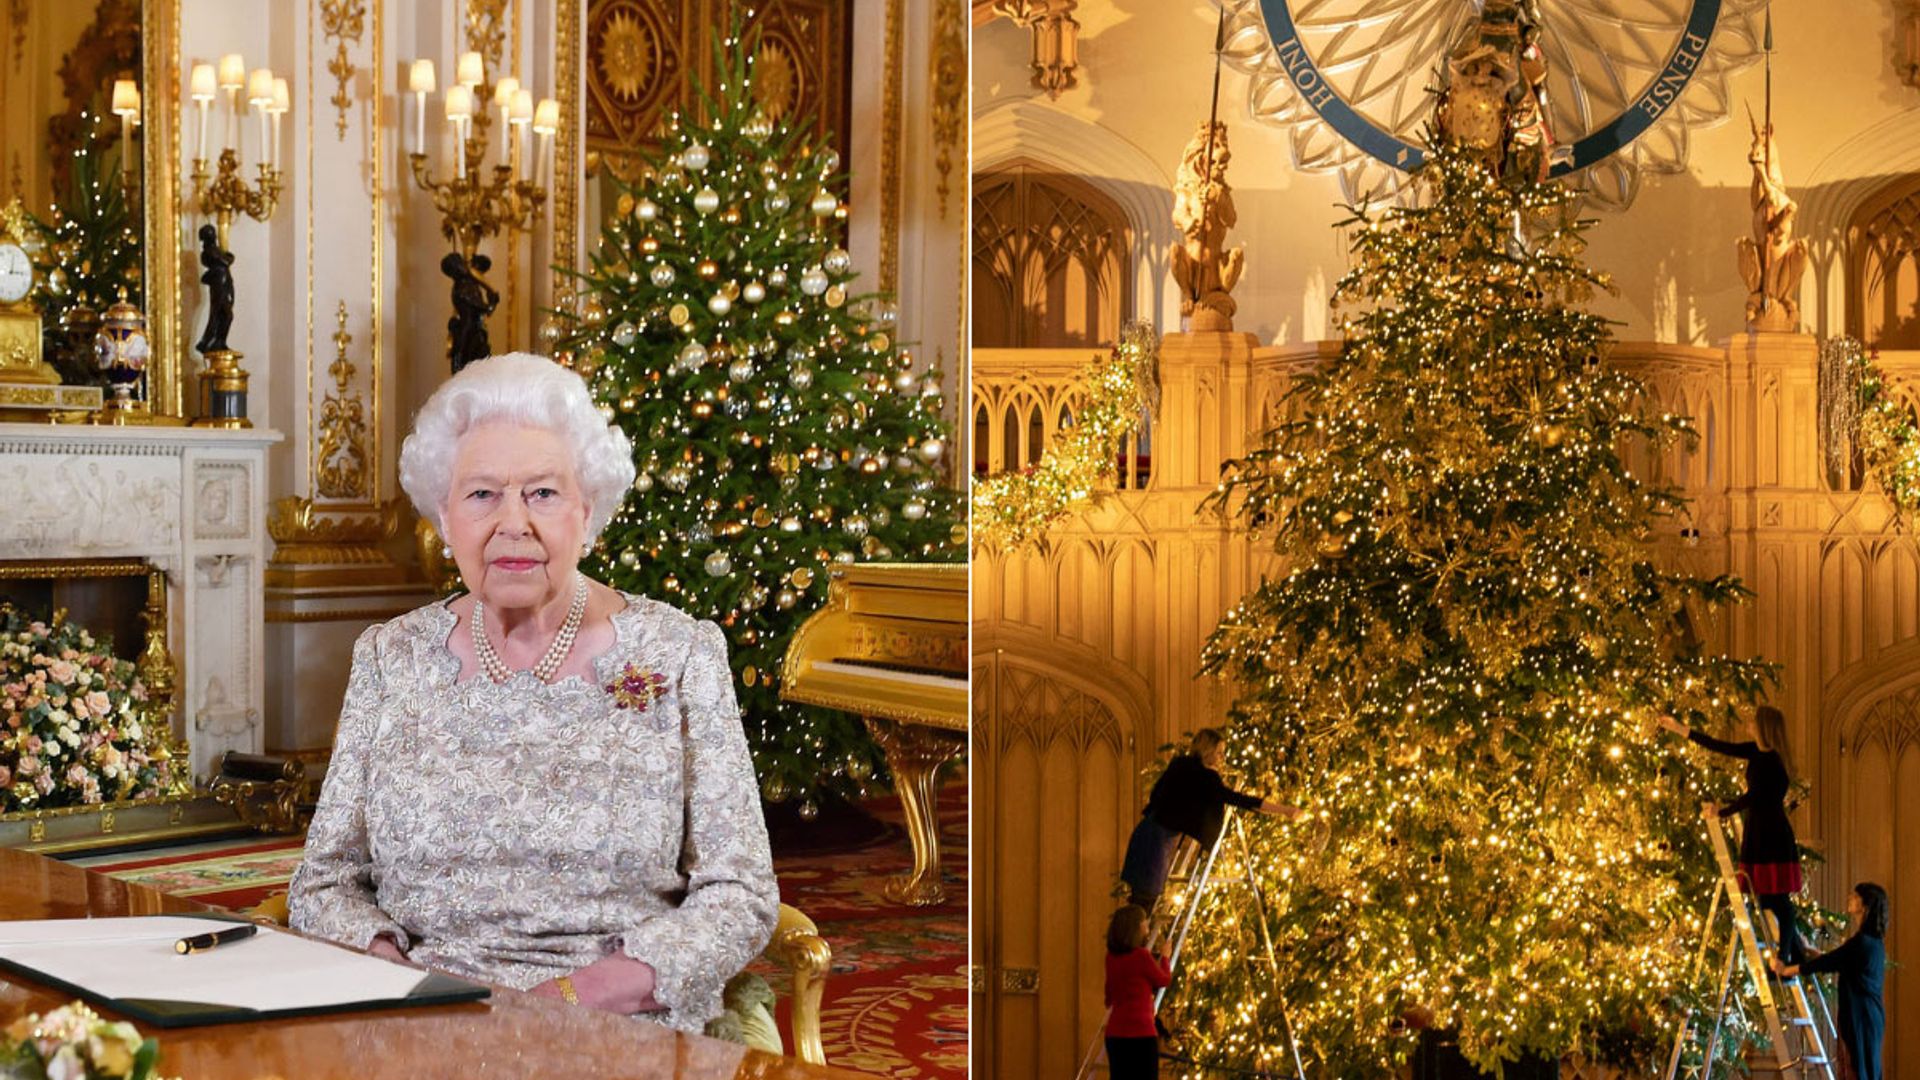 The Queen's Christmas decorations at royal homes are more epic than